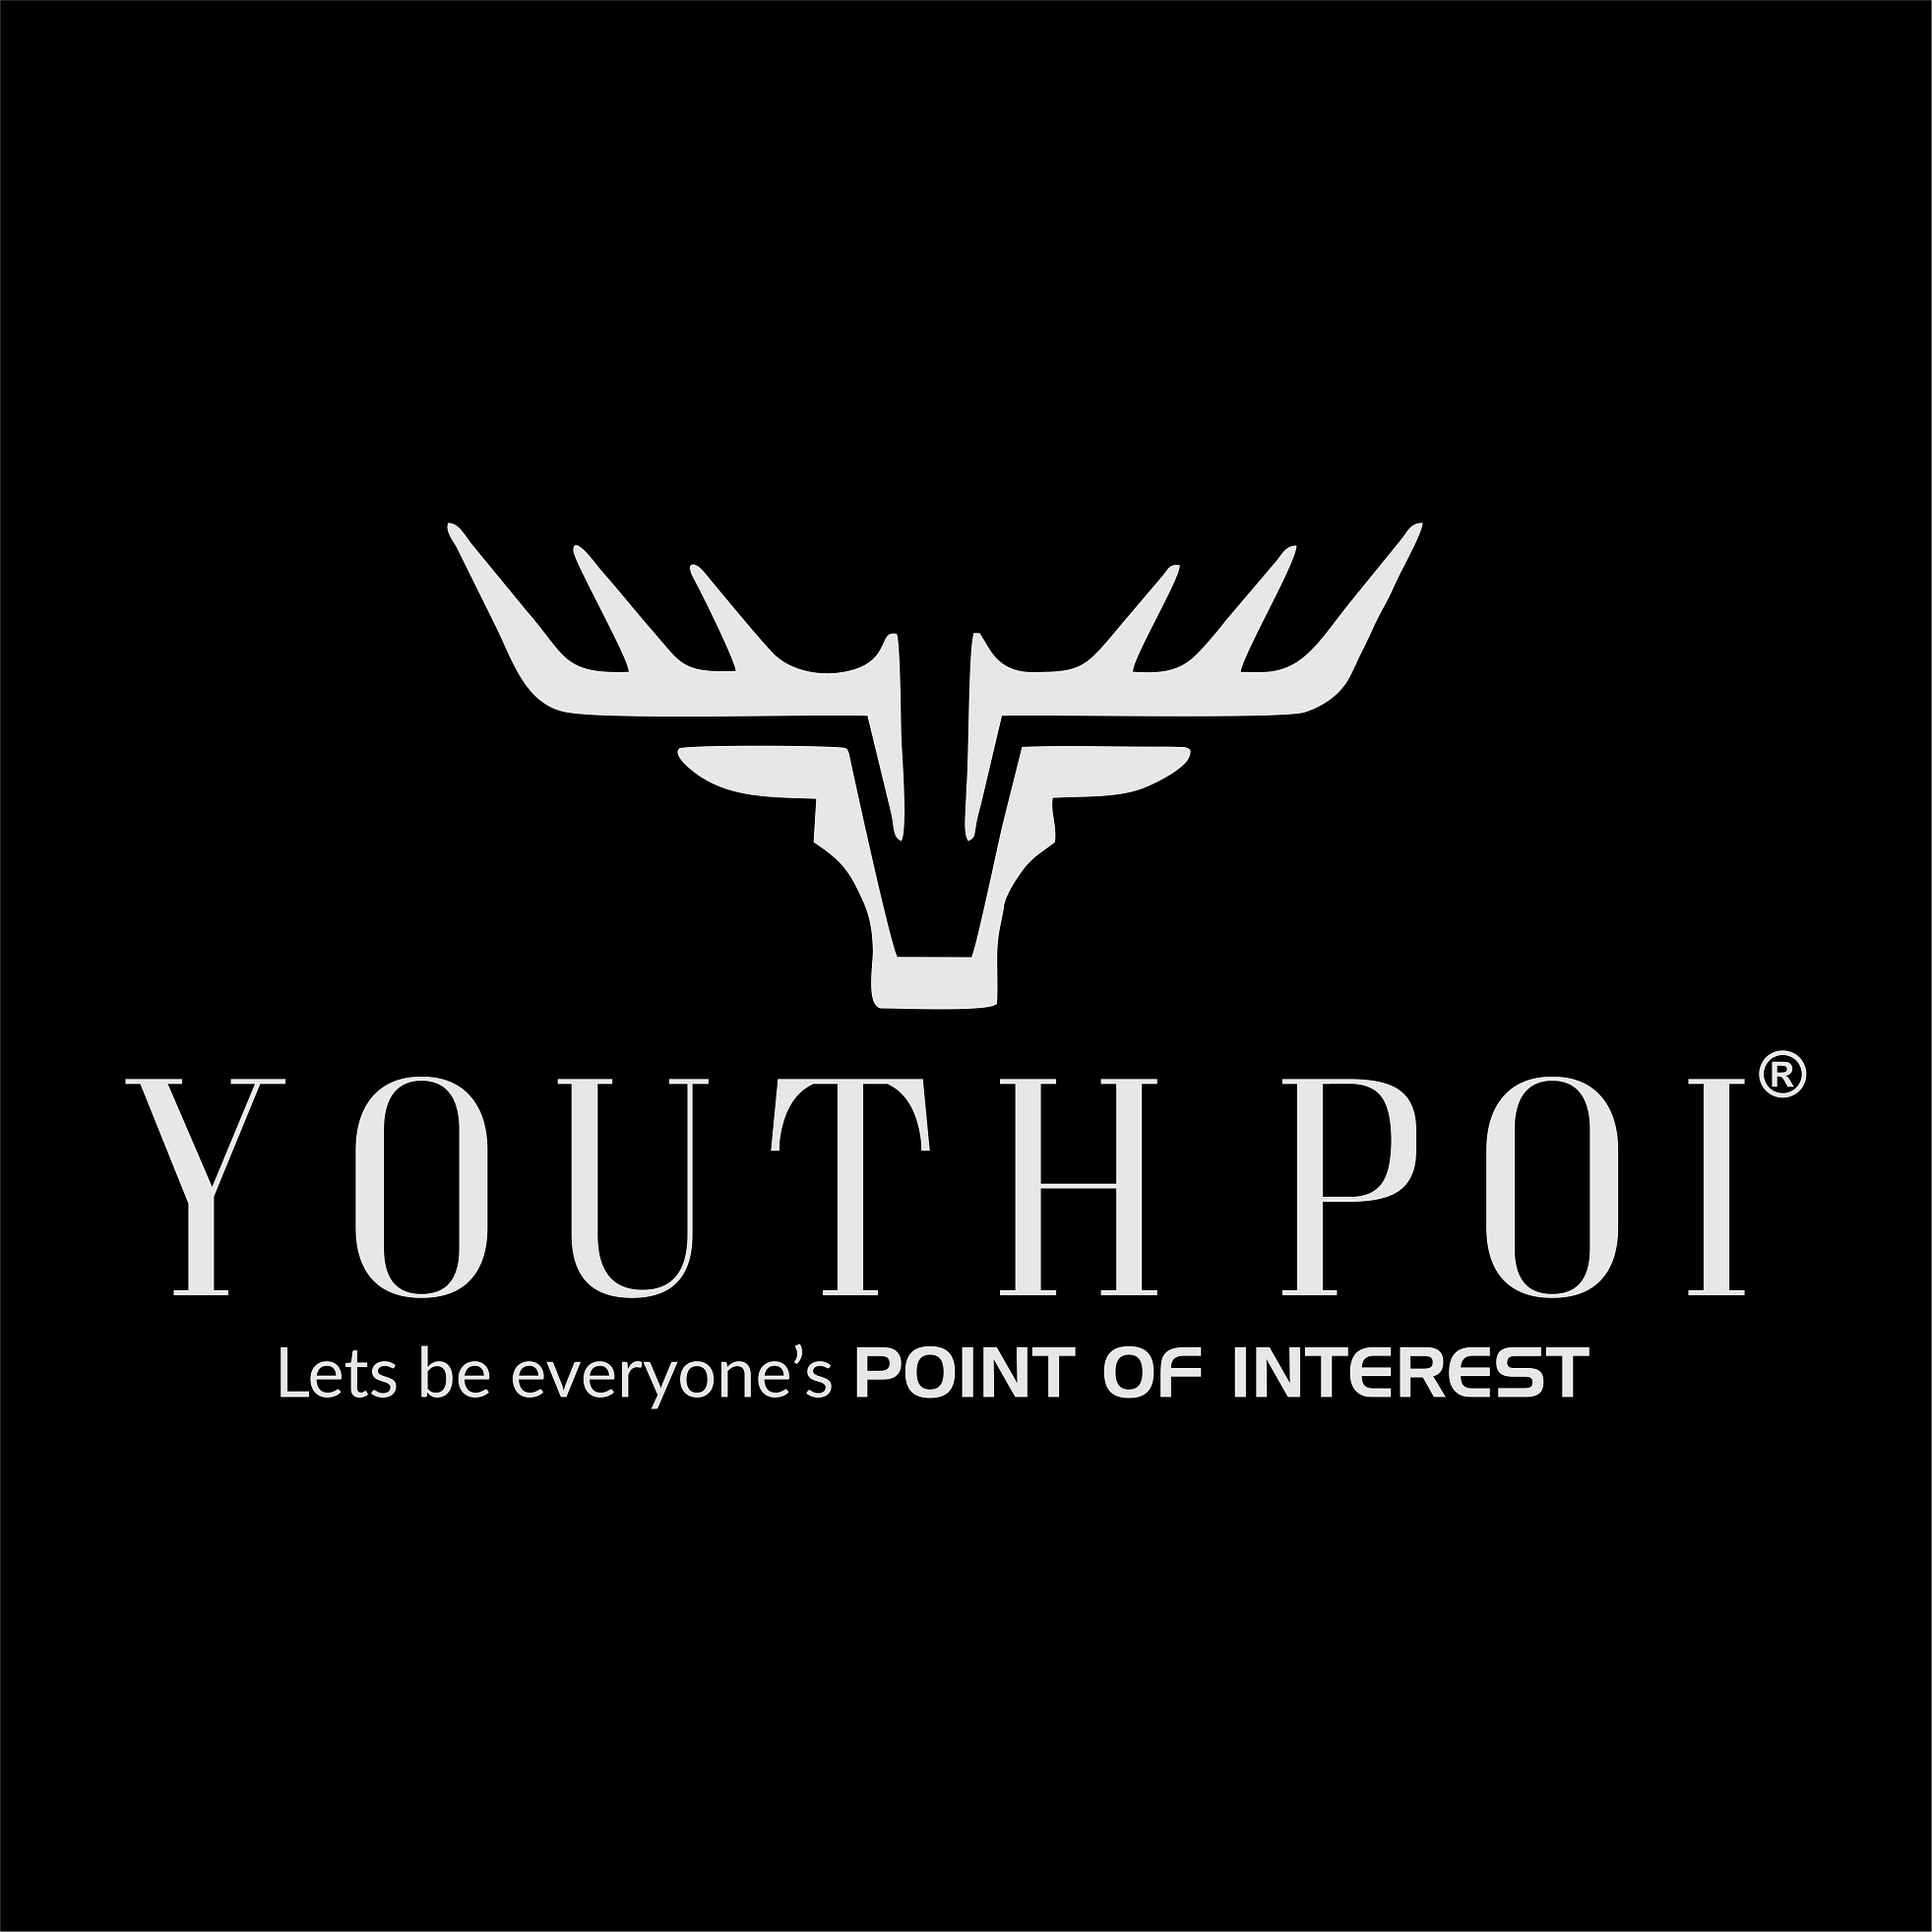 Youthpoi 